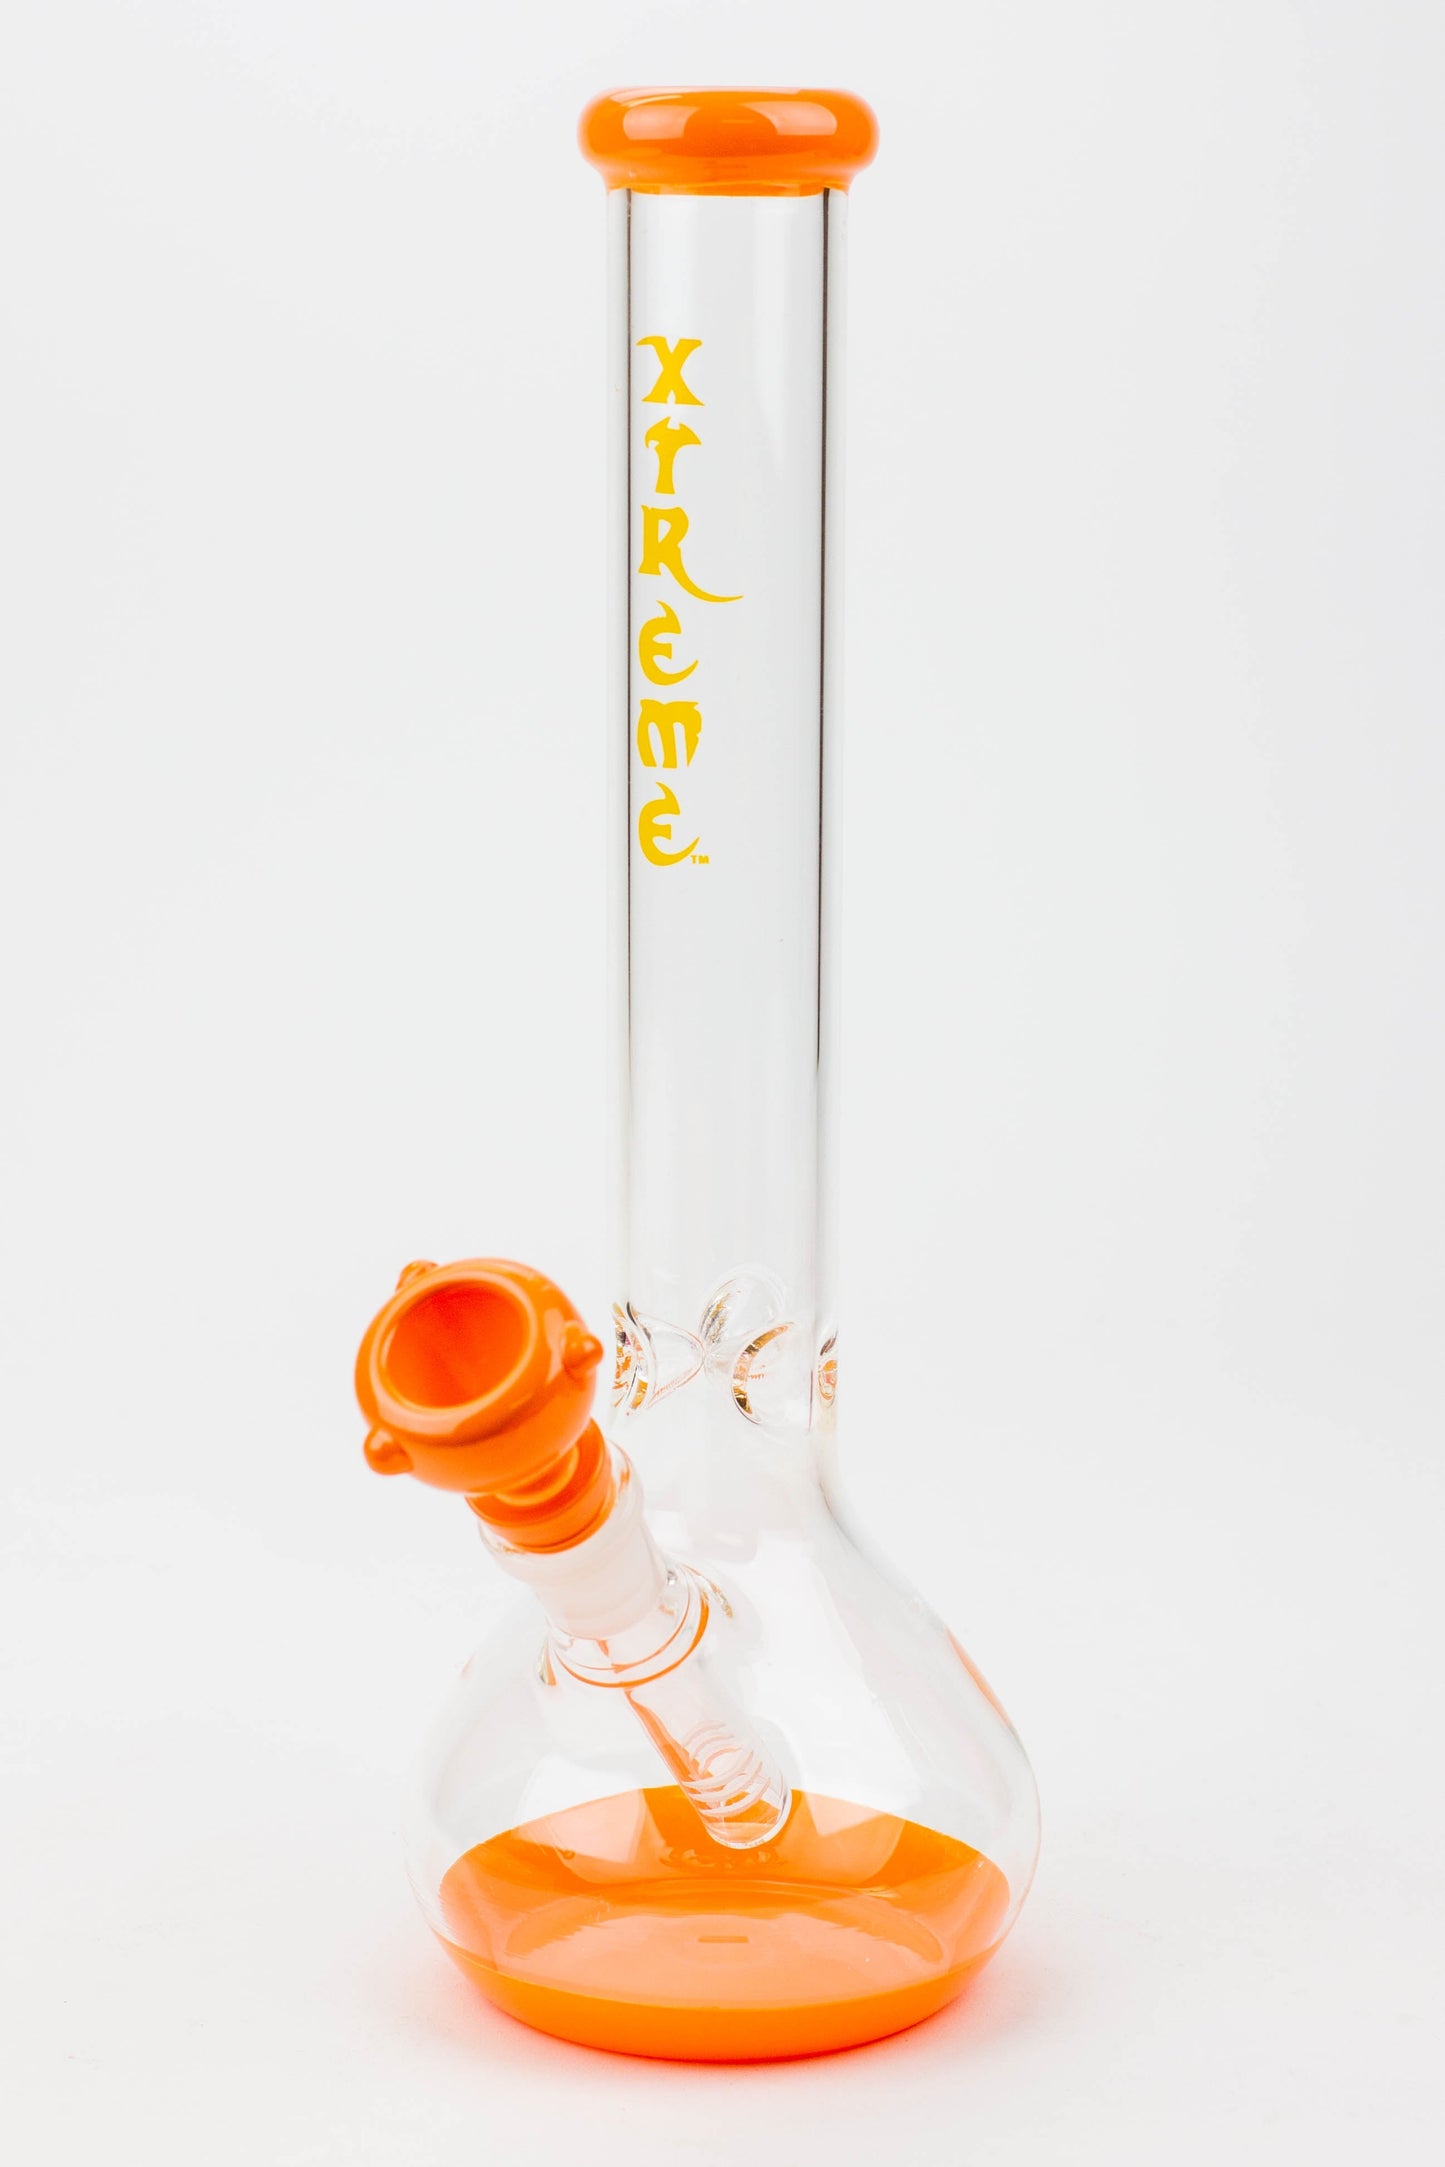 12" XTREME Round base Glass Bong [XTR5008] Flower Power Packages Orange 